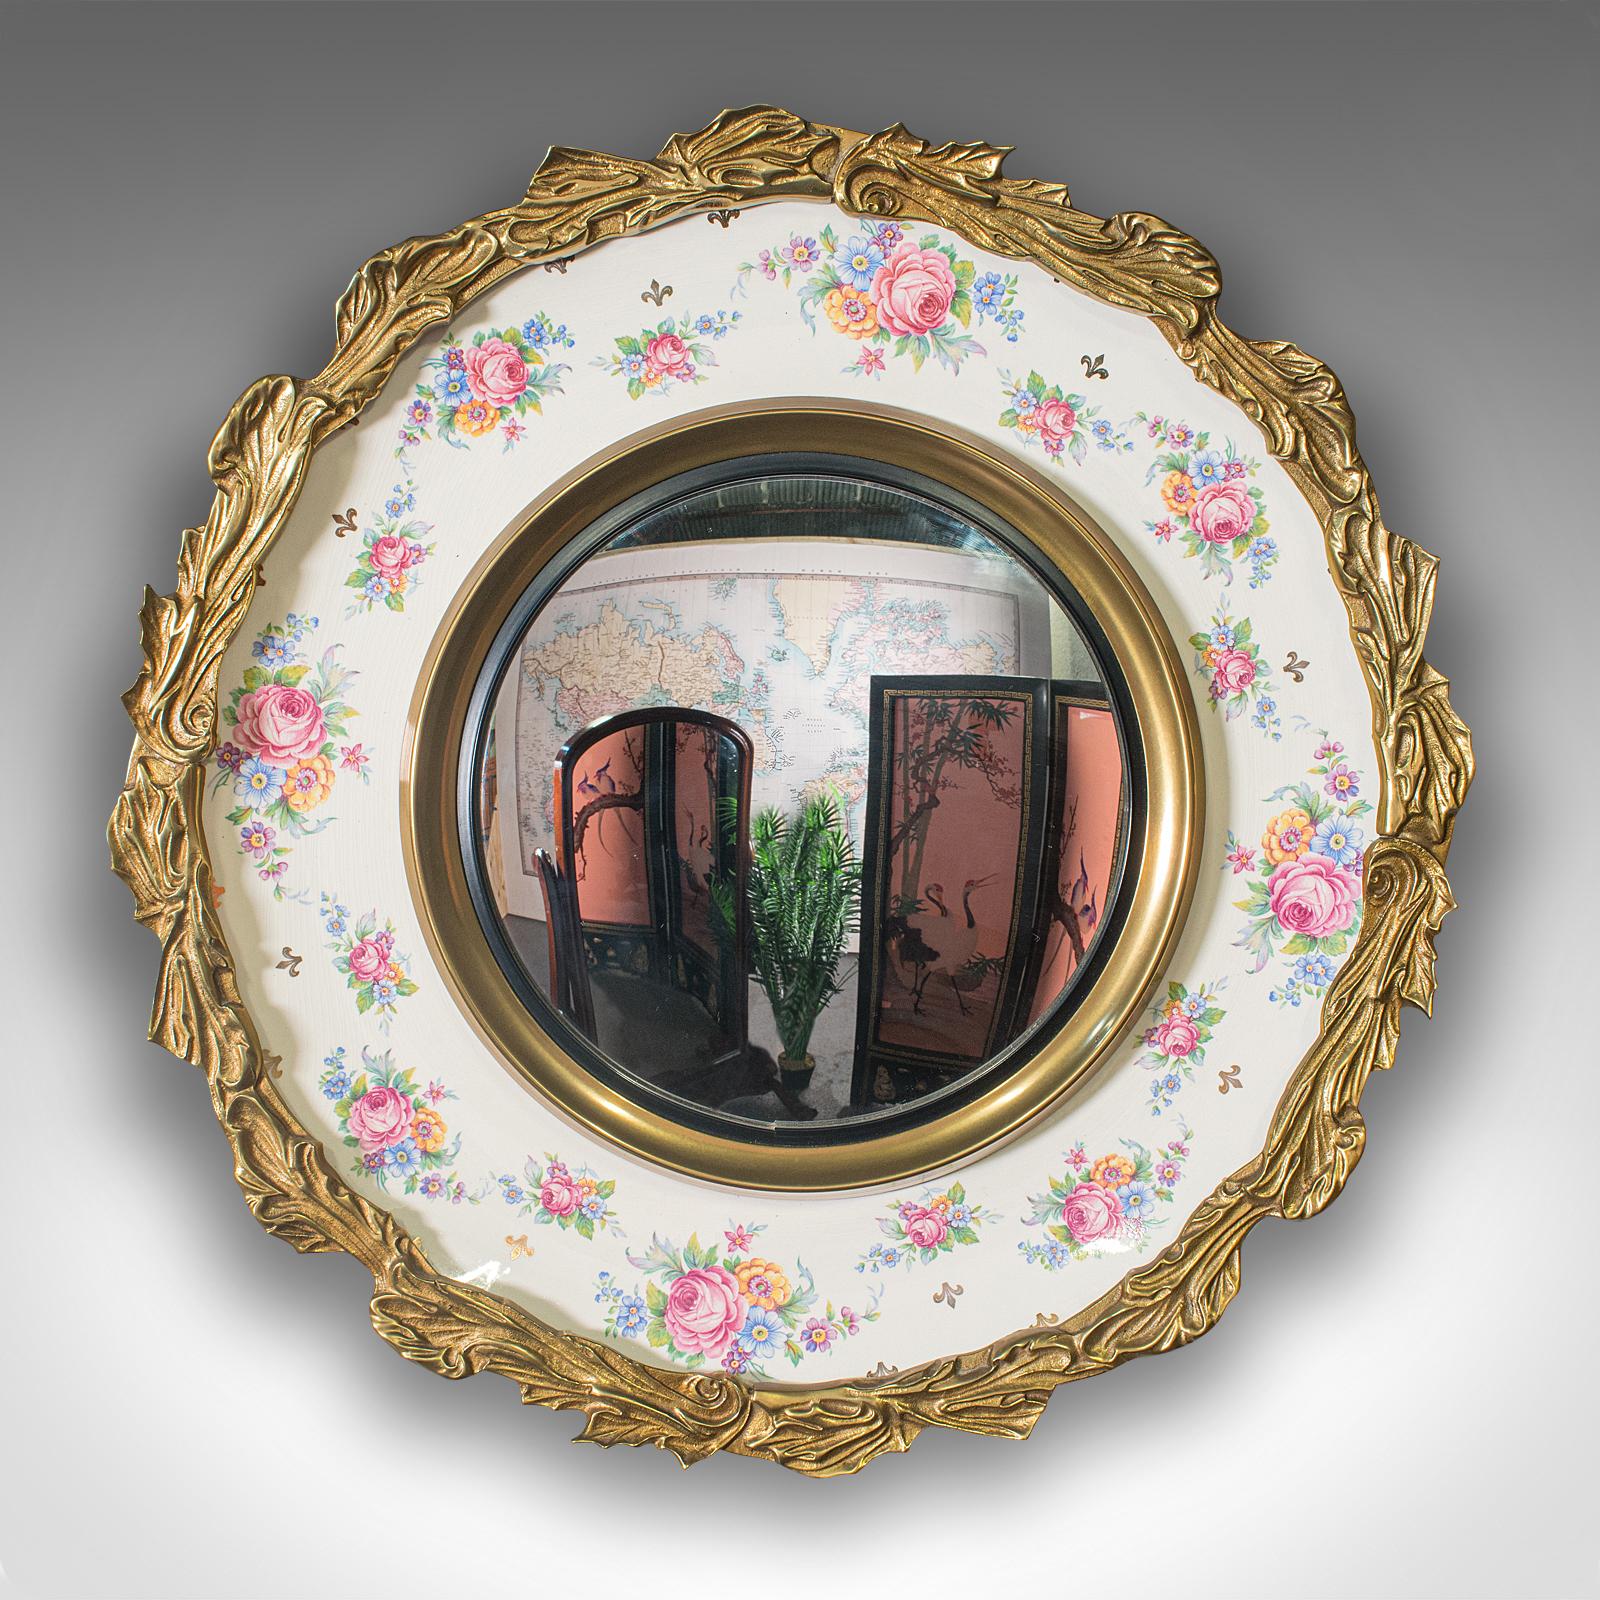 This is a vintage convex mirror. An English, glass and ceramic wall mirror with Italianate taste, dating to the early 20th century, circa 1930.

Distinctive mirror with charming decoration and classical Italian overtones
Displays a desirable aged